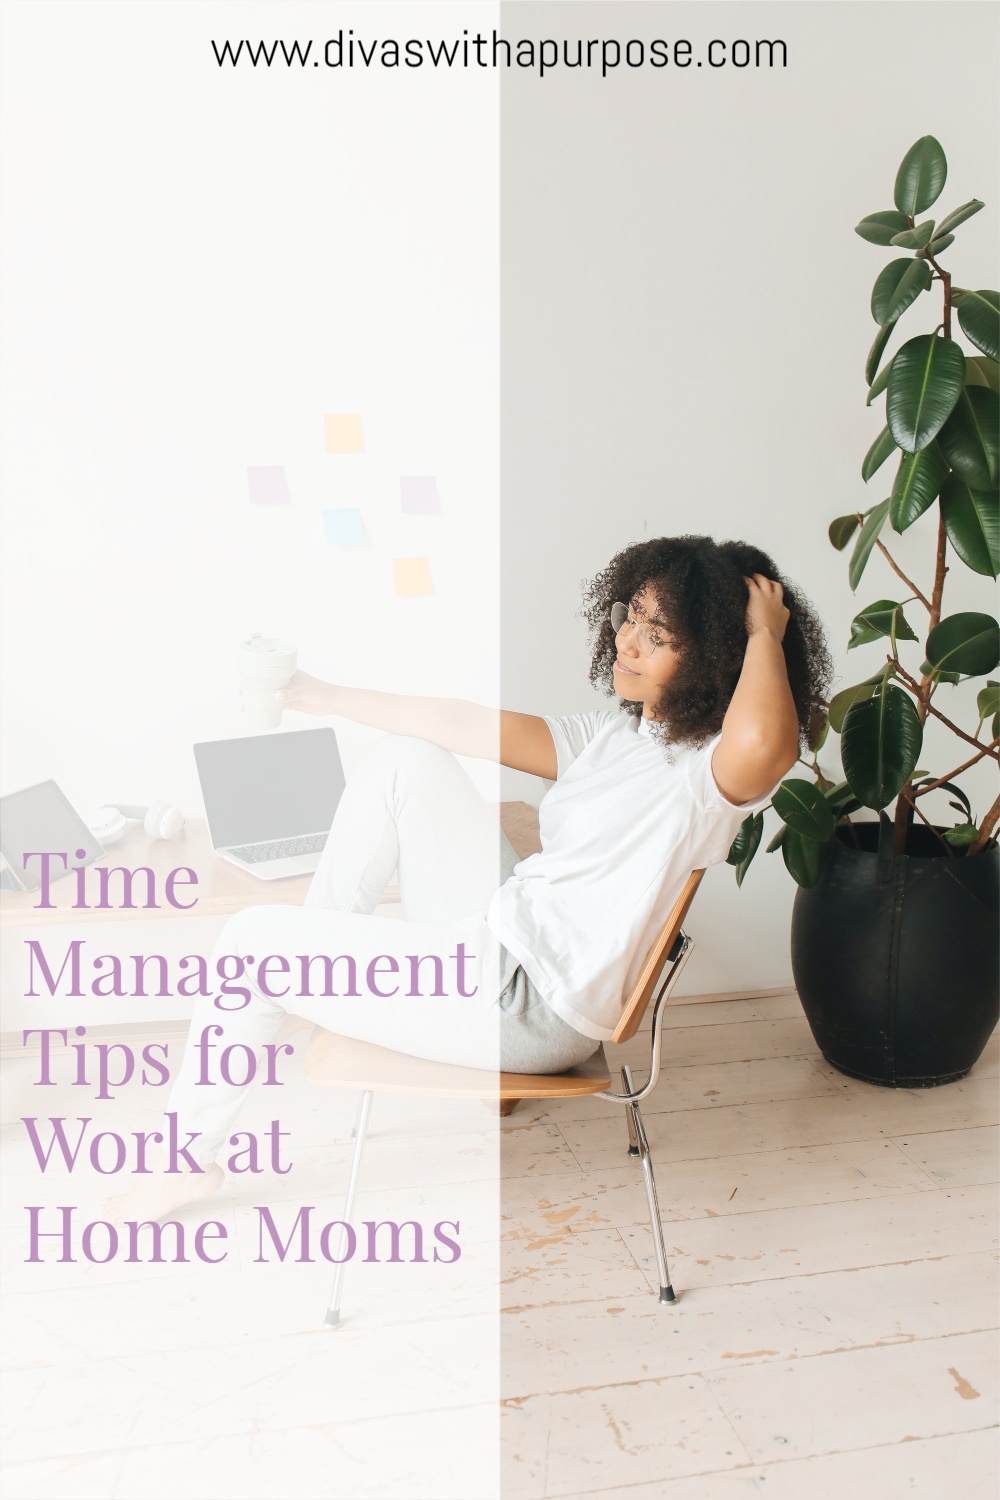 Time Management Tips for Work at Home Moms